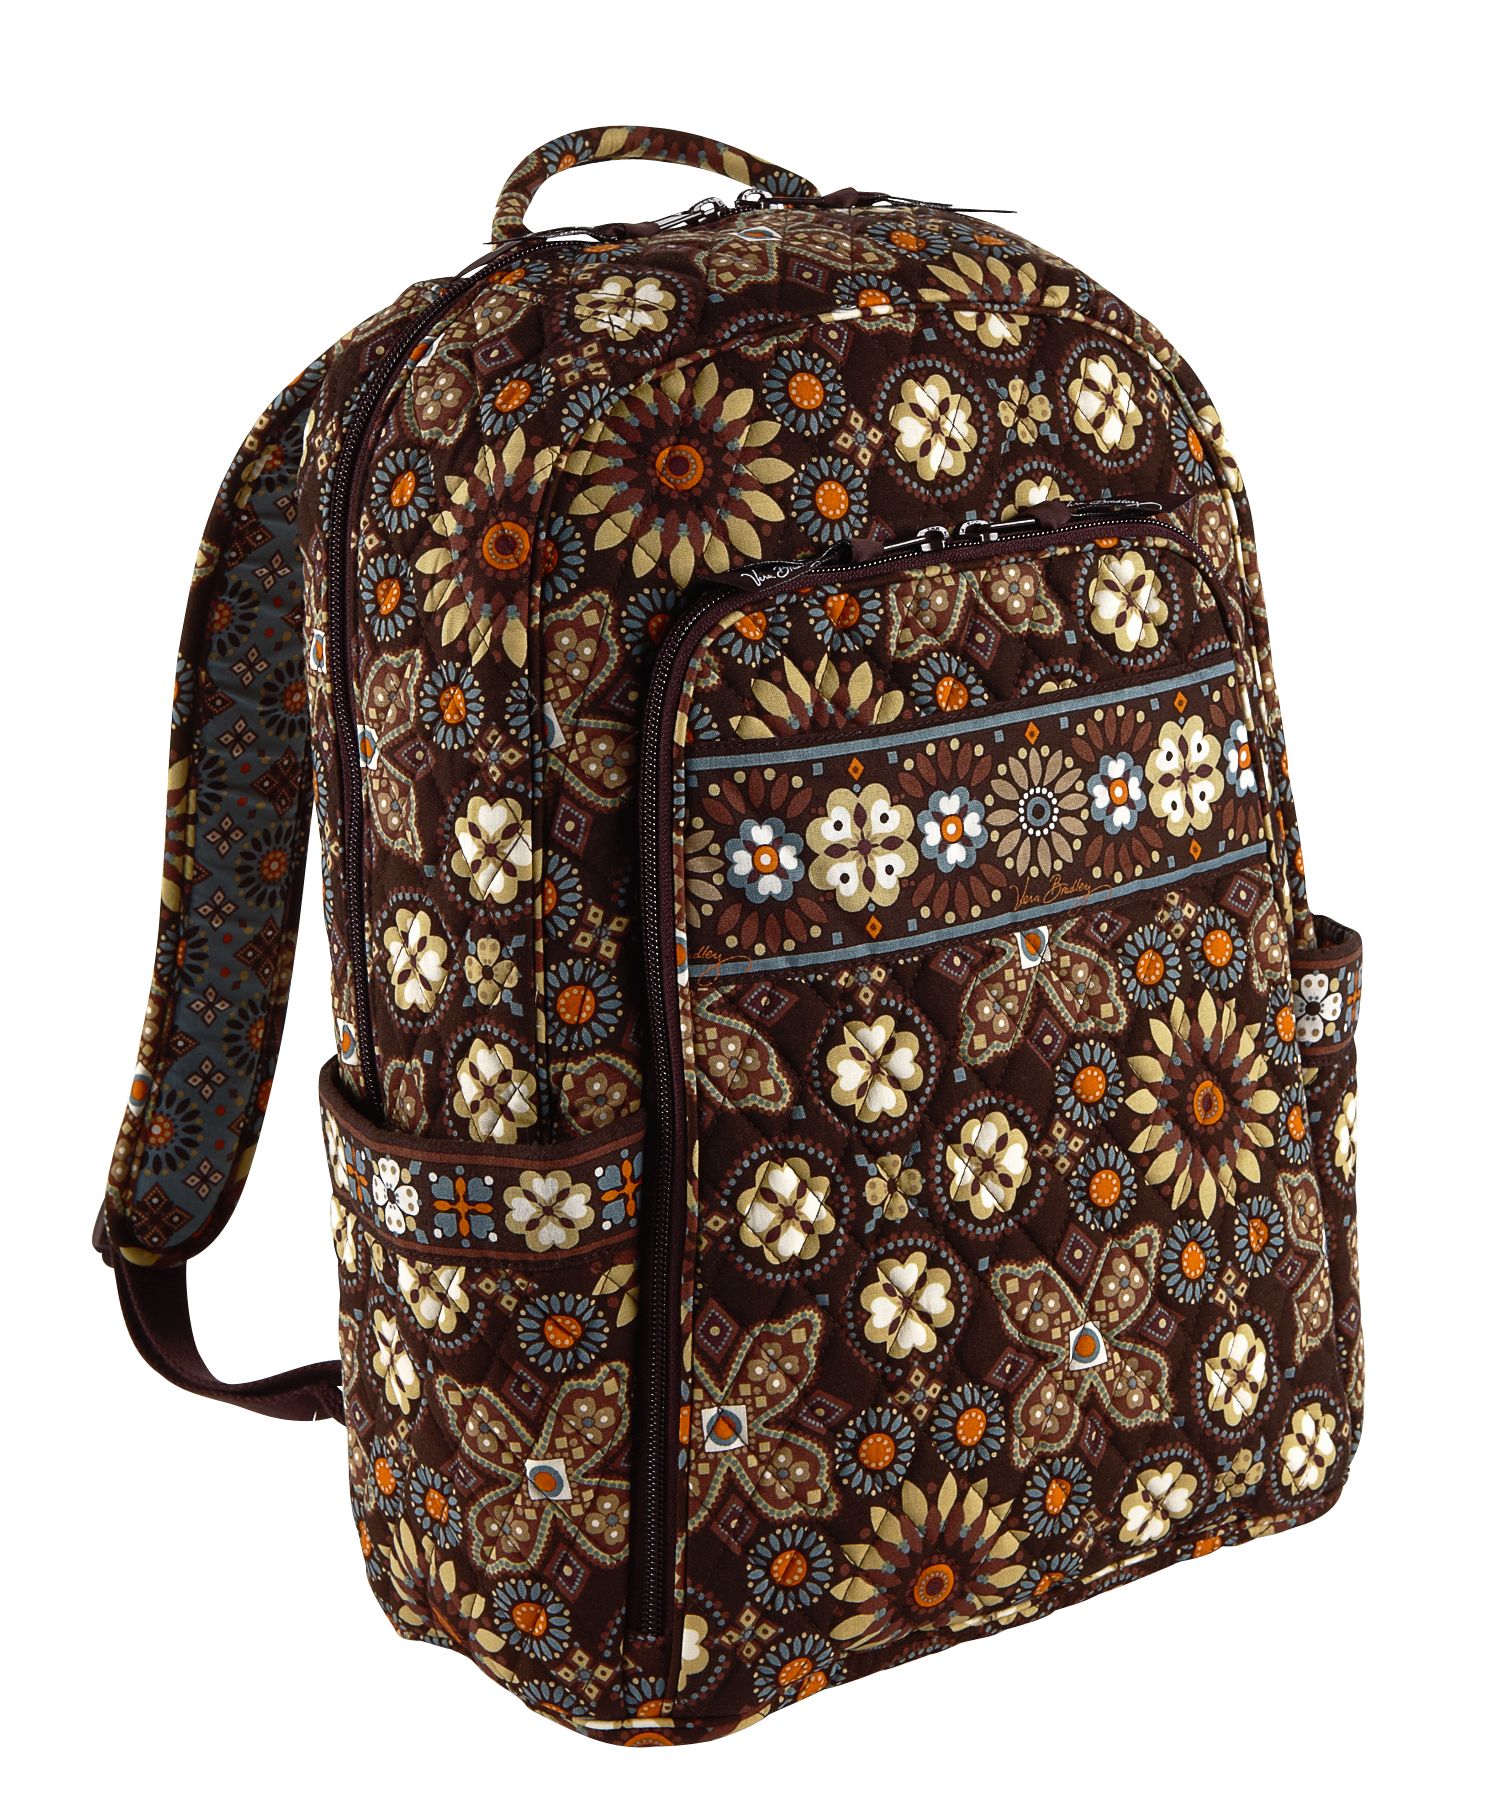 Discount Vera Bradley Laptop Backpack in Canyon Interview ,